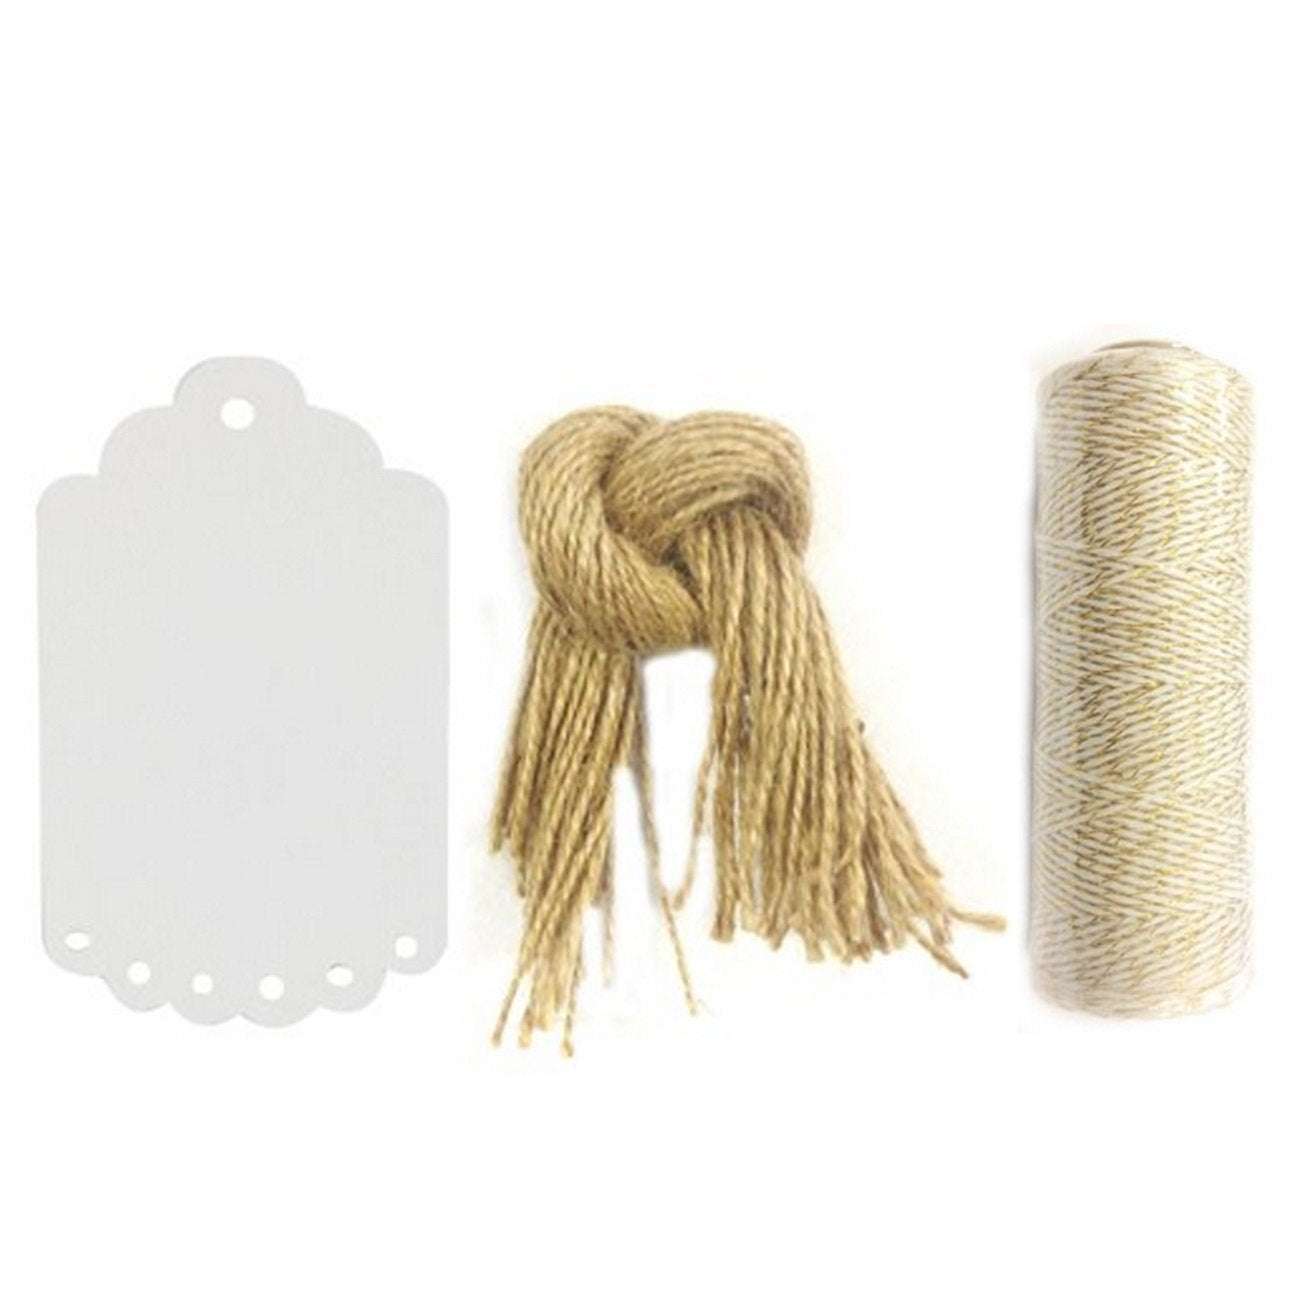 Wrapables 50 Gift Tags with Free Cut Strings  + Cotton Baker's Twine 4ply 110 Yard